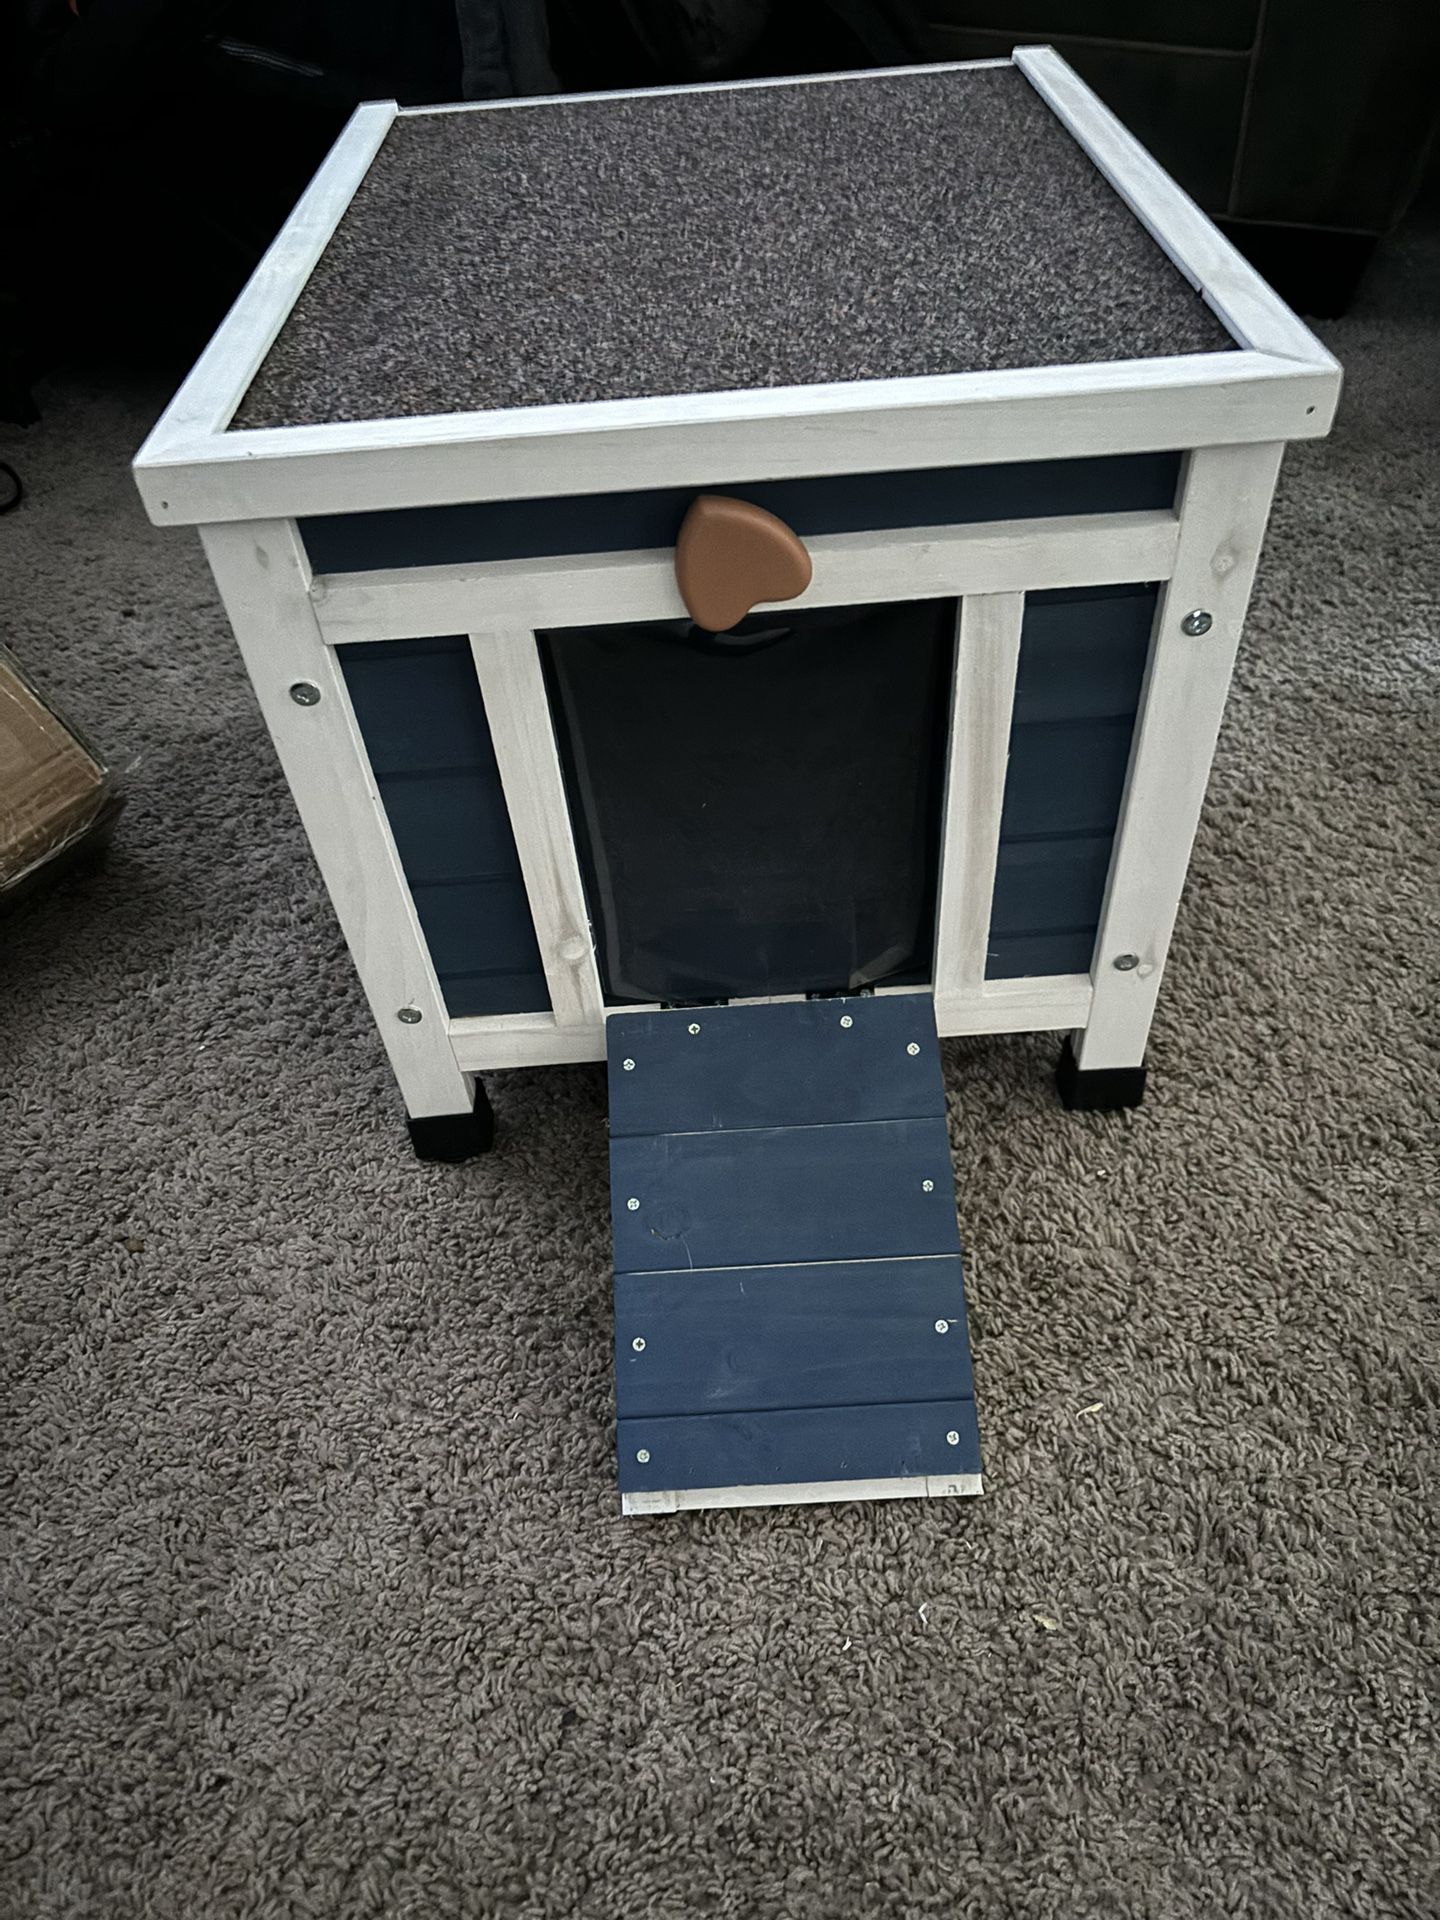 Cat House For Outdoor Cats, Weatherproof Feral Cat House, Wooden Outside Shelter For Cat, Rabbit And Small Pet-Navy Blue …45 dollars